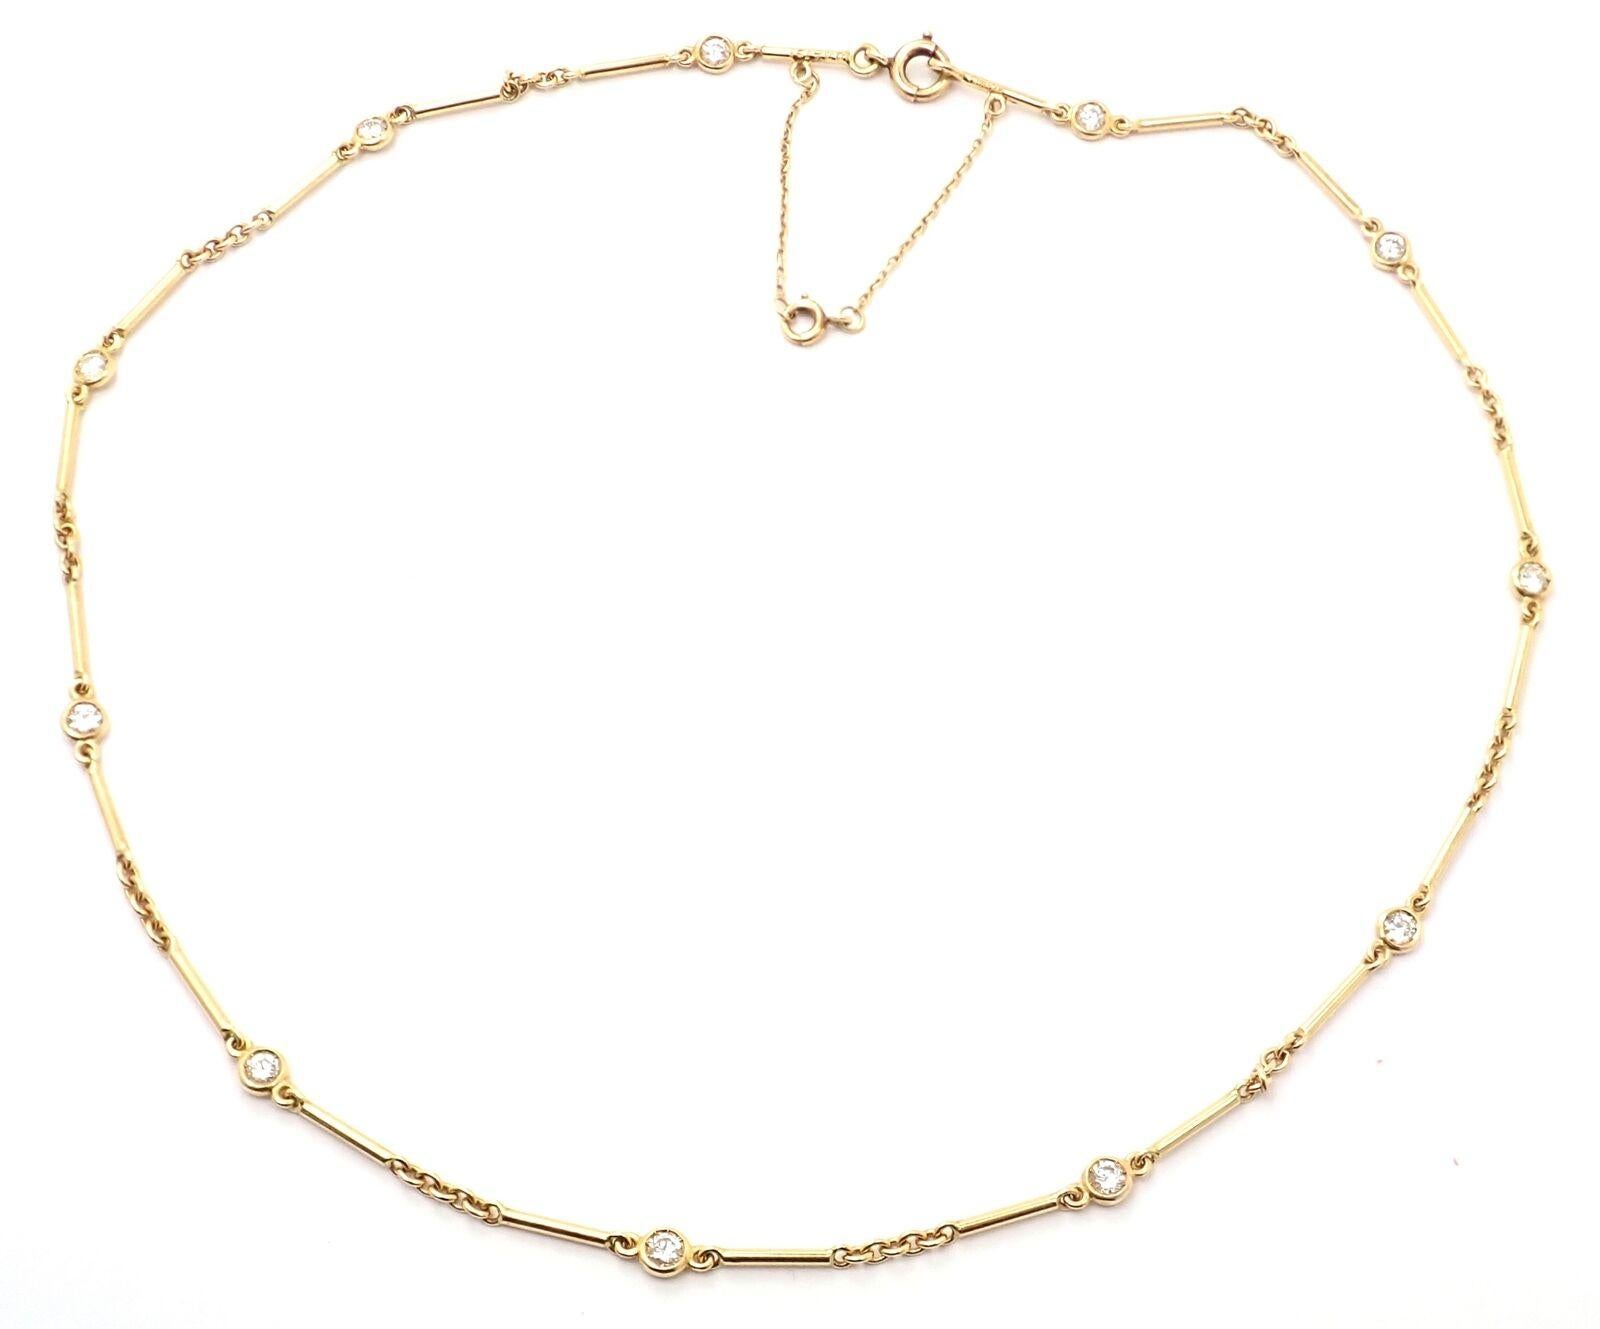 18k Yellow Gold Diamond By The Yard Choker Necklace by Cartier.
With 11 round brilliant cut diamonds VS1 clarity, G color total weight approx. 1.10ct
Details:
Chain Length: 15